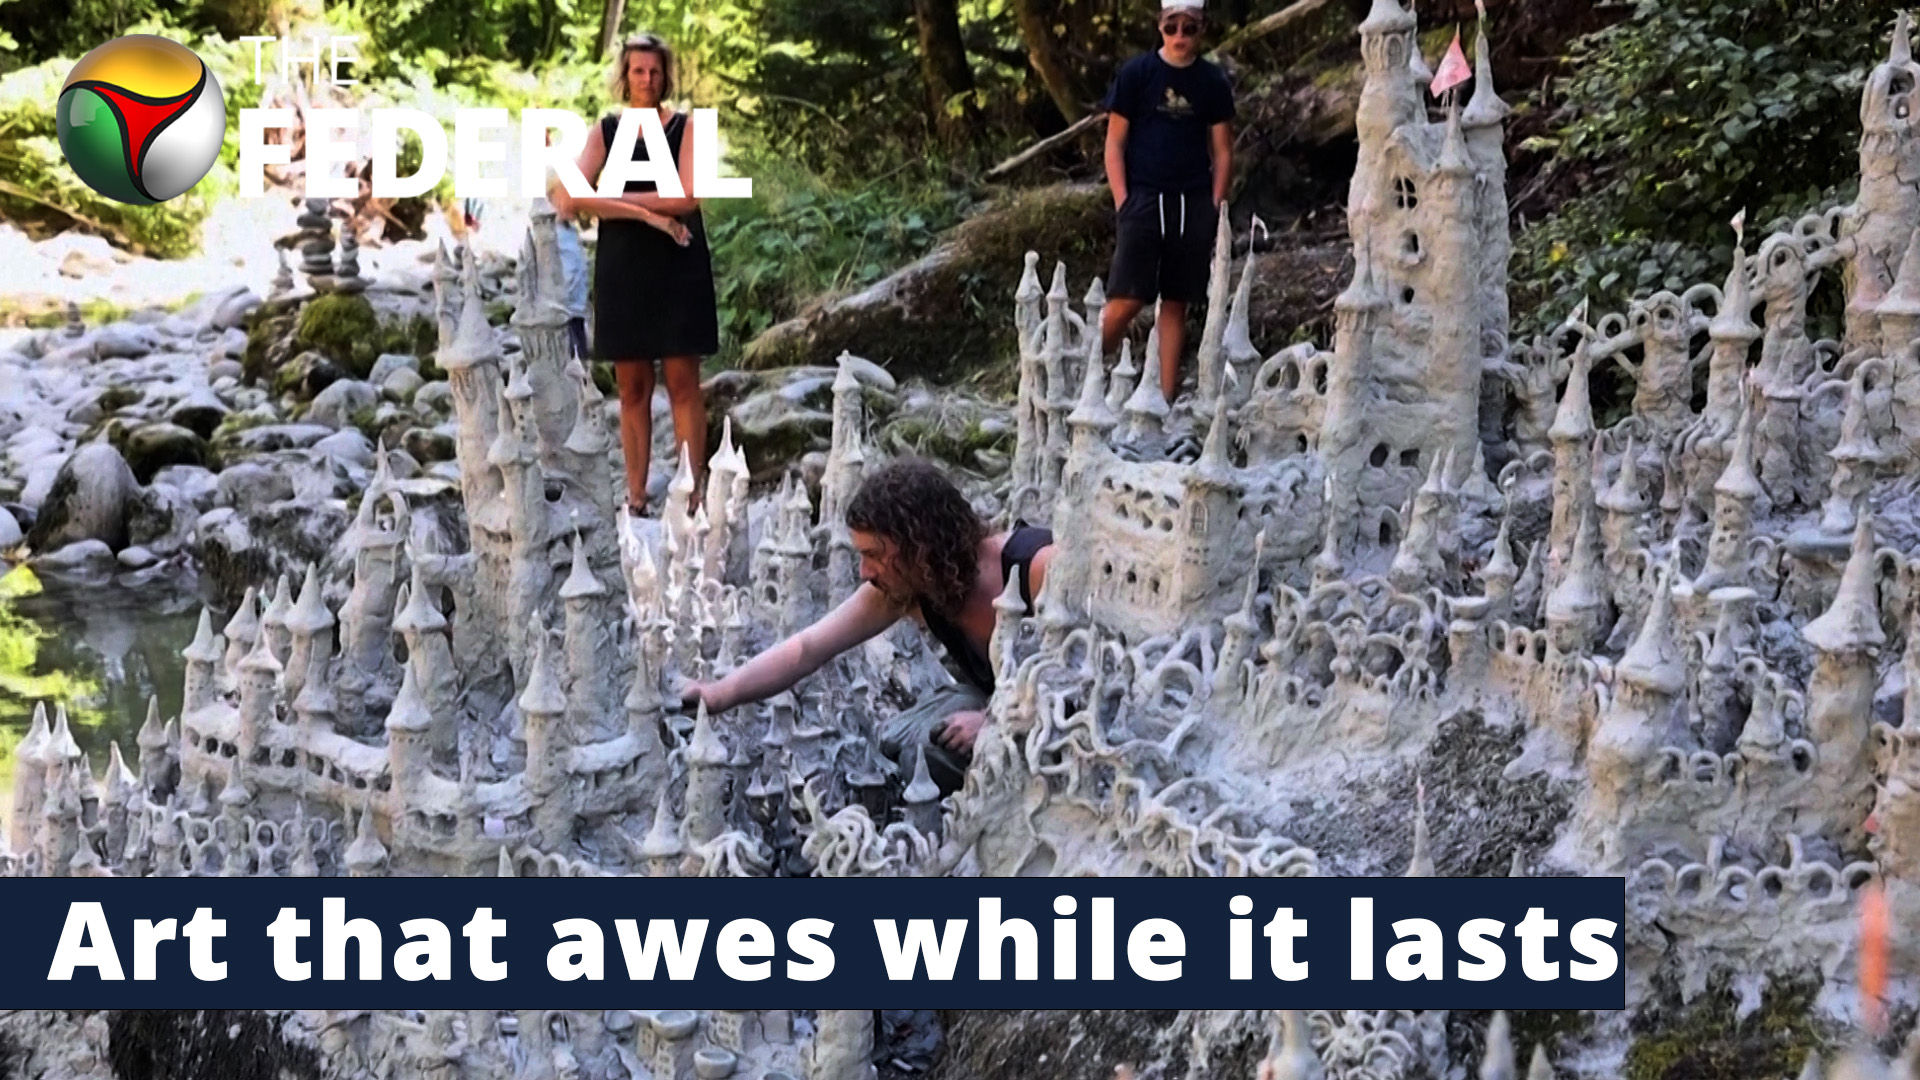 Swiss artist sculpts sprawling clay castle on dried river bank